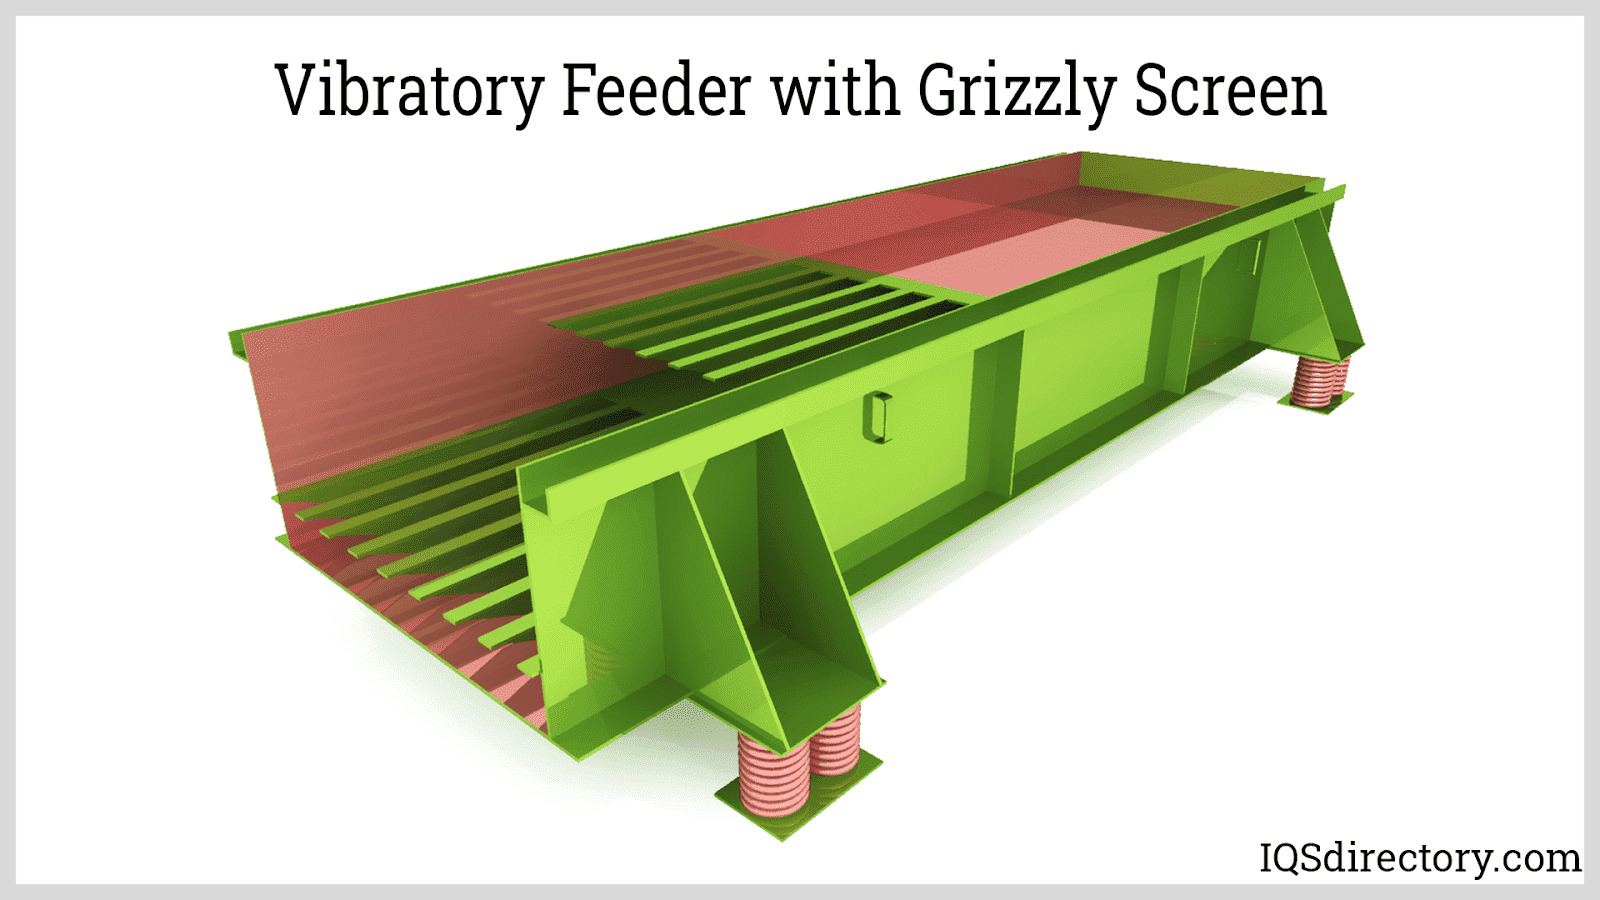 Vibratory Feeder with Grizzly Screen